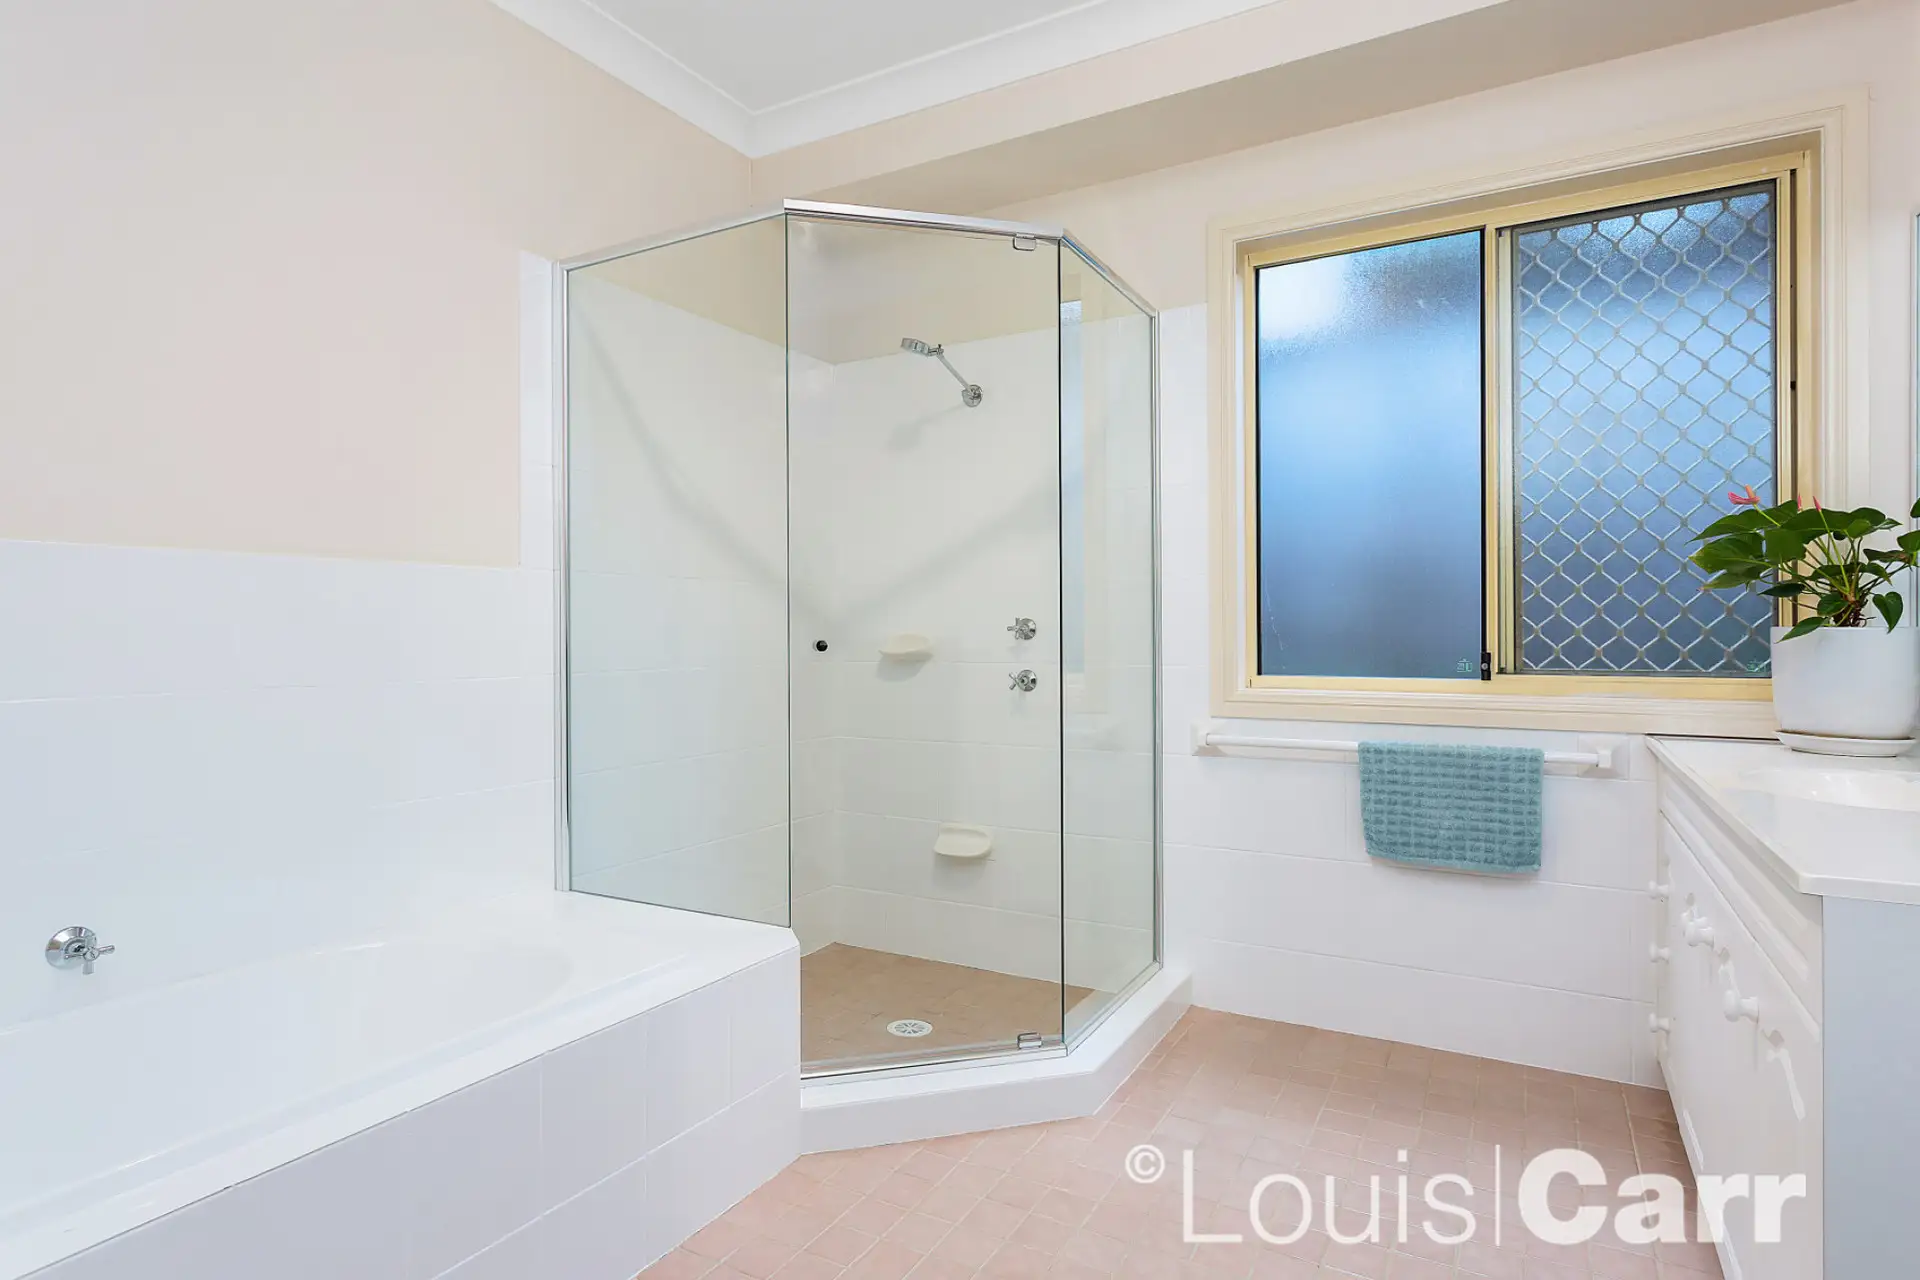 Photo #6: 18 Dalkeith Road, Cherrybrook - Sold by Louis Carr Real Estate